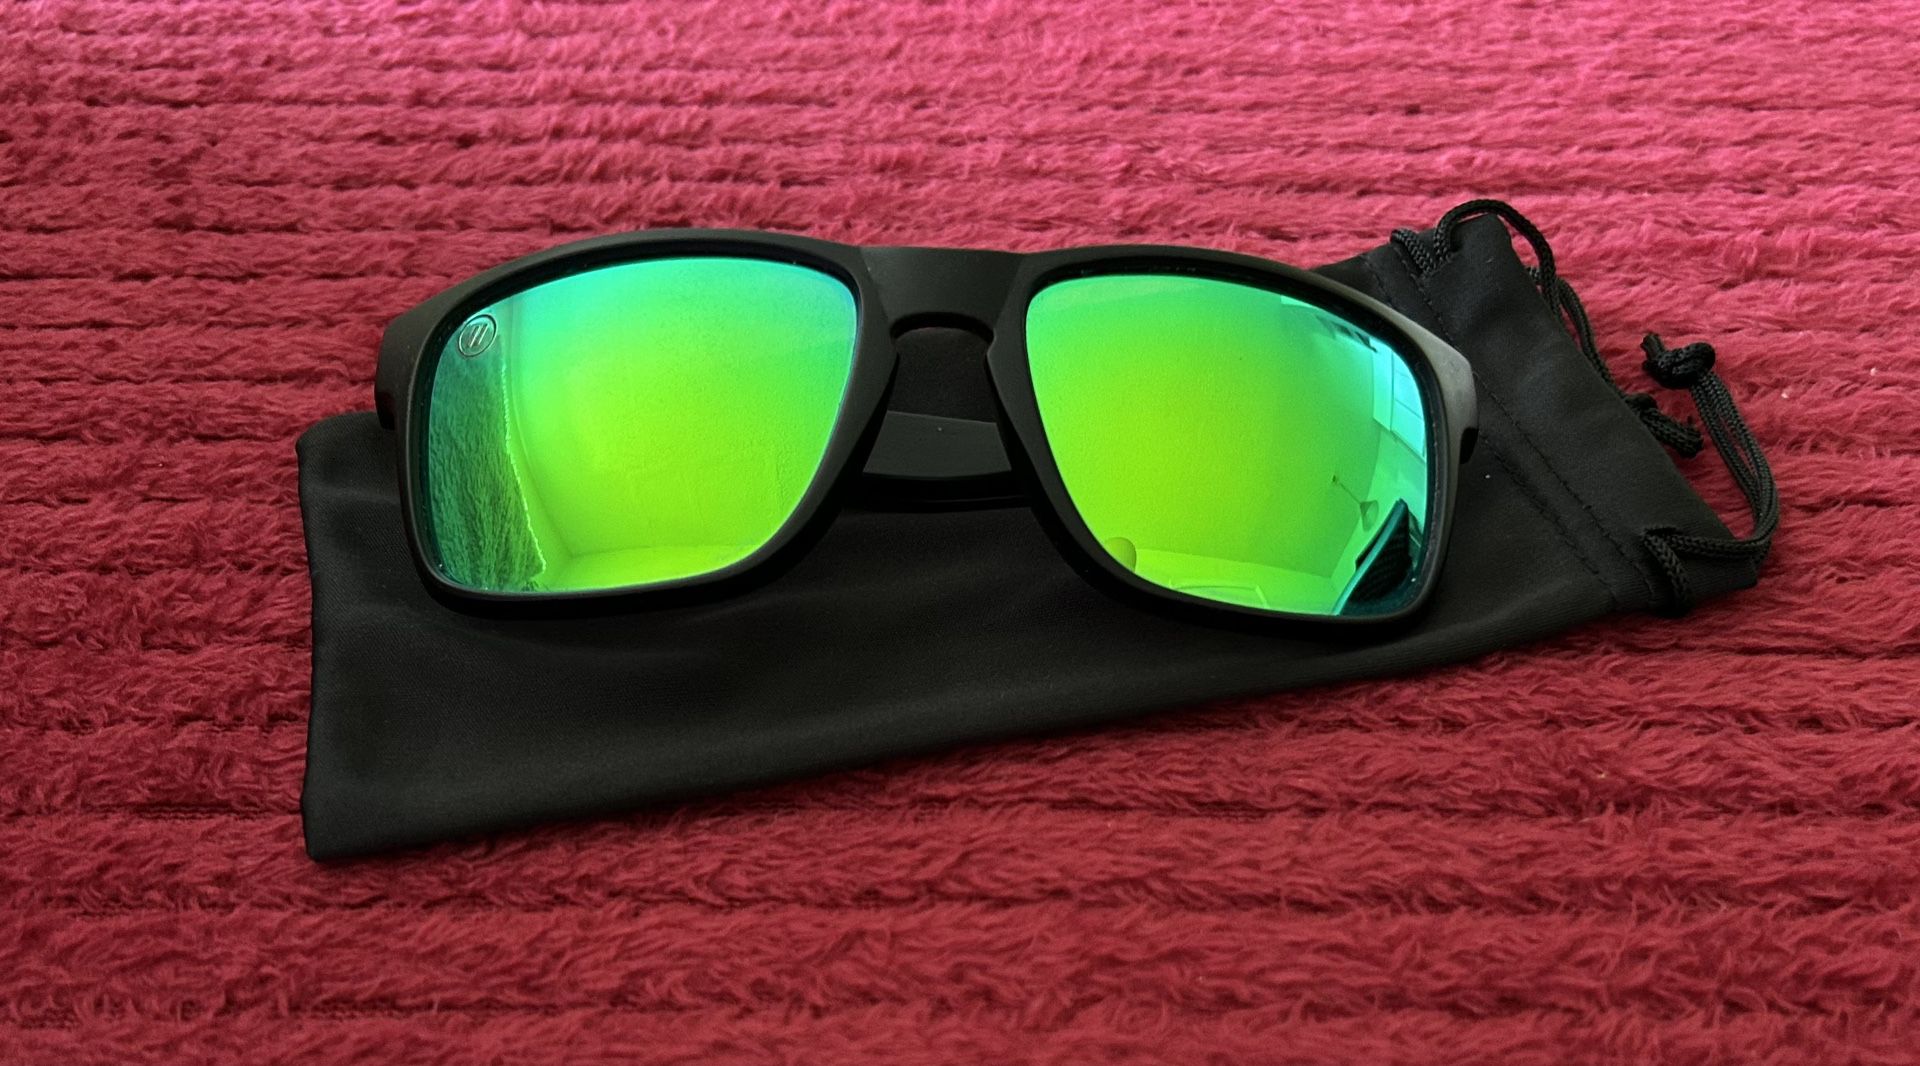 Blenders polarized sunglasses in excellent condition- Low Price. $15